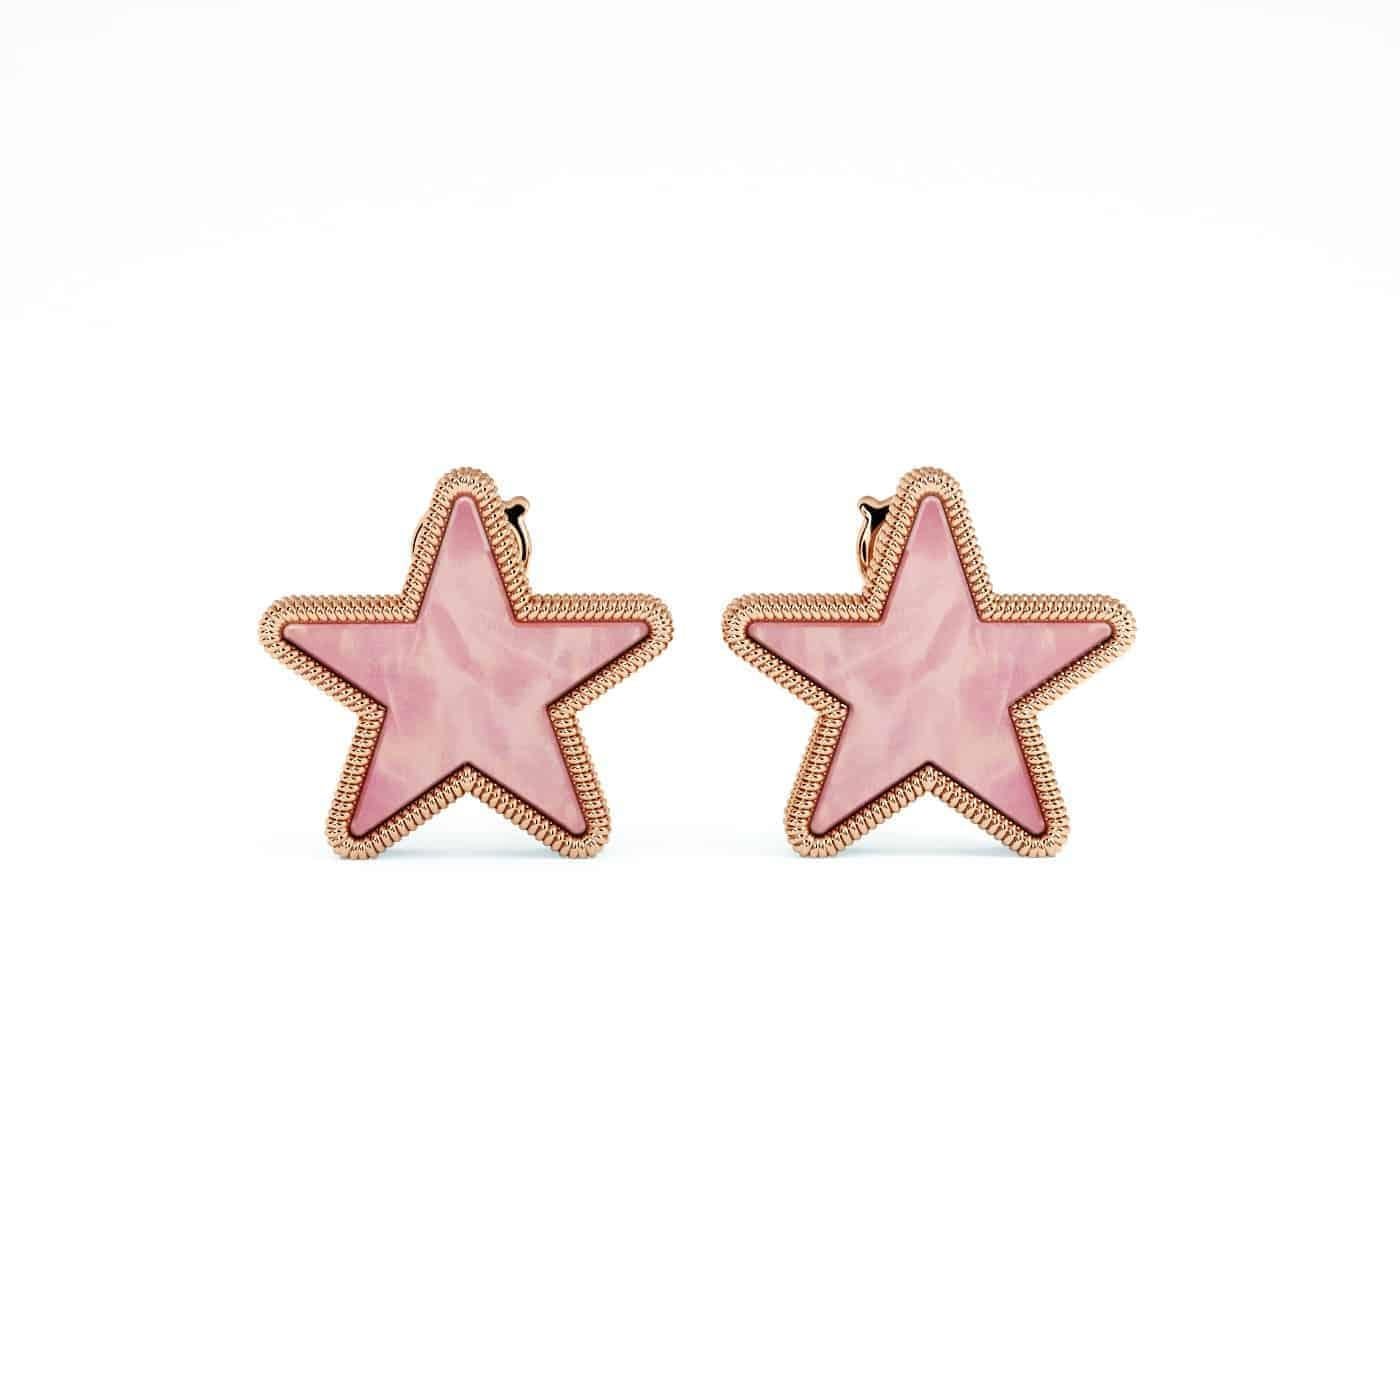 Each striking & spangled star is precisely carved from natural gemstones and encased in a beautiful solid gold rope finish with no visible prongs, creating a one-of-a-kind piece that brings double the luck and confidence to its wearer

18 Karat Rose